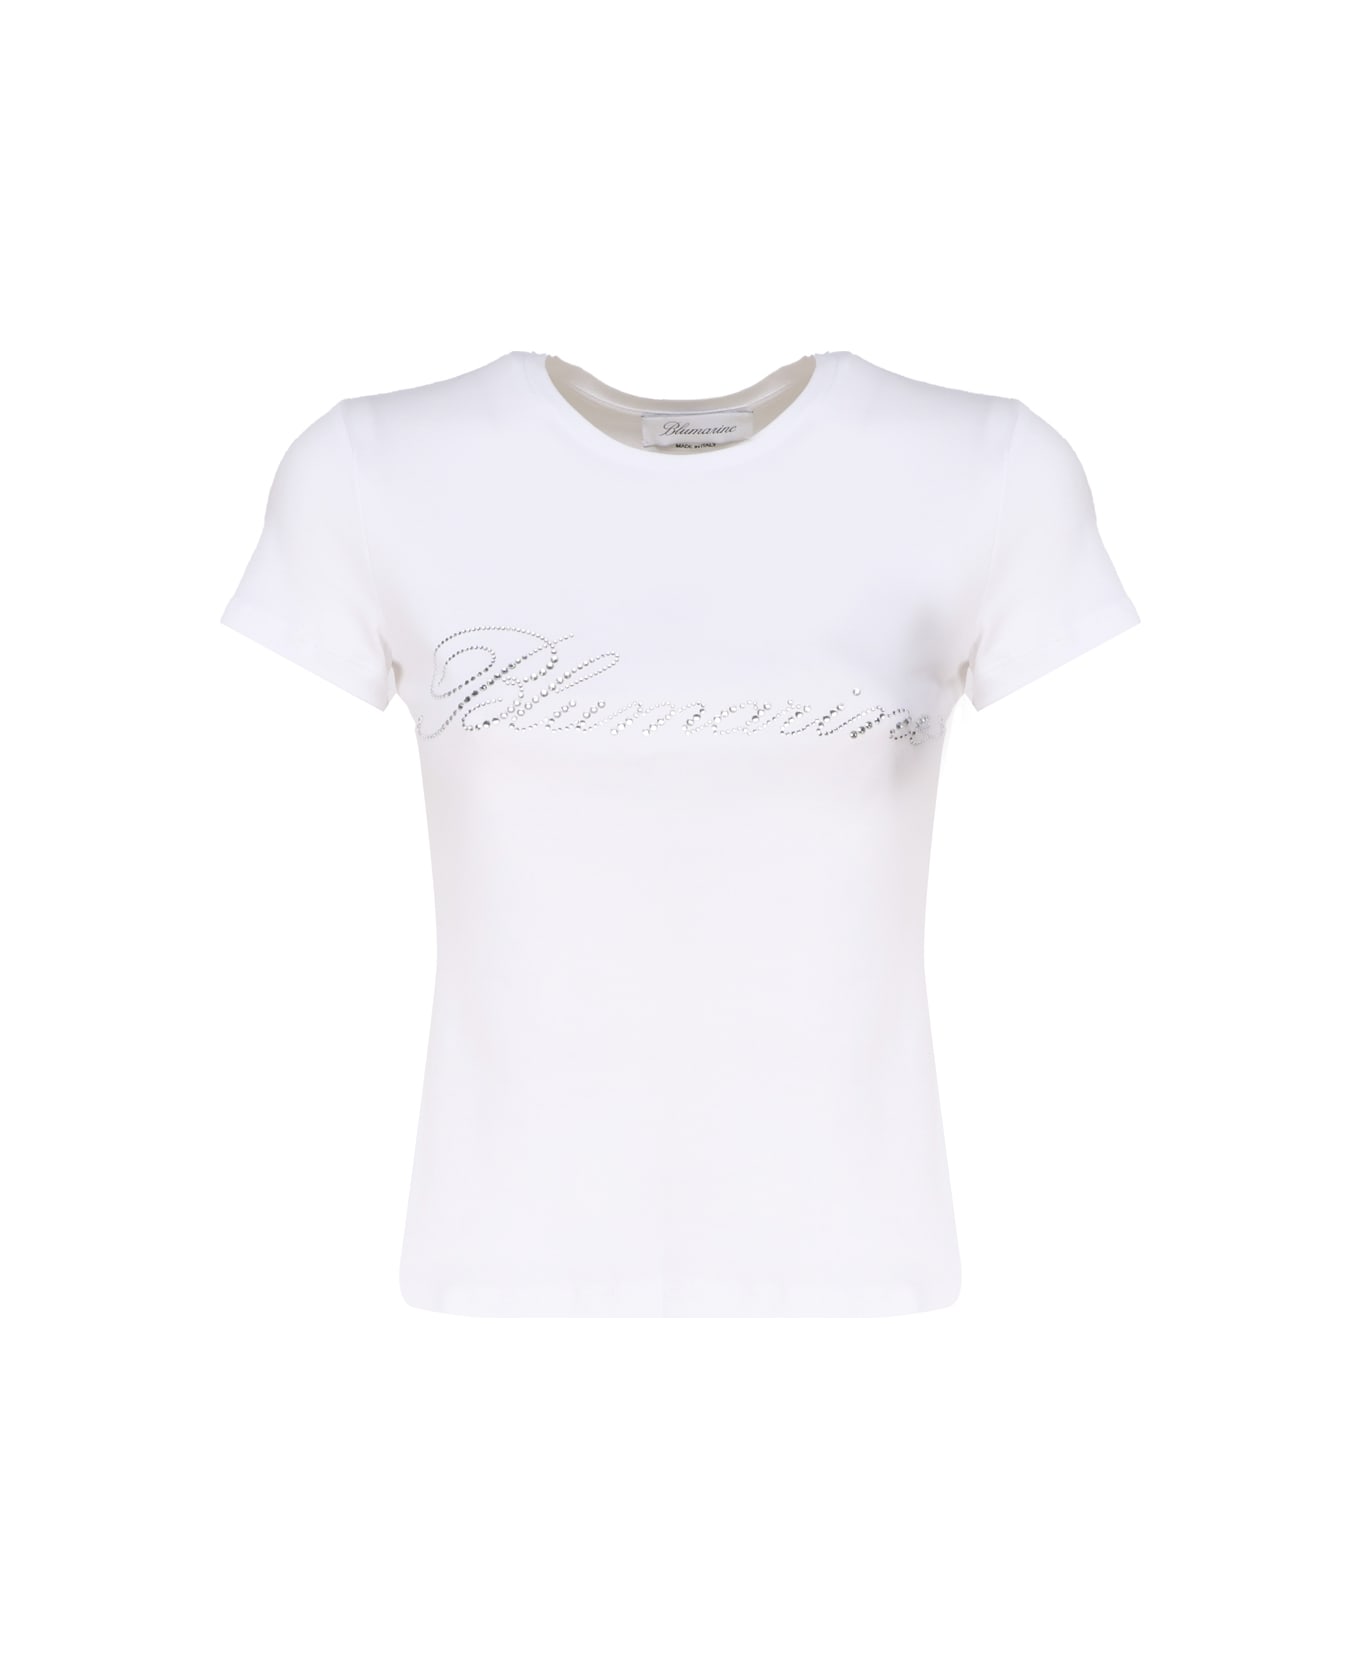 Blumarine T-shirt With Studs And Rhinestone Embroidery - White Tシャツ